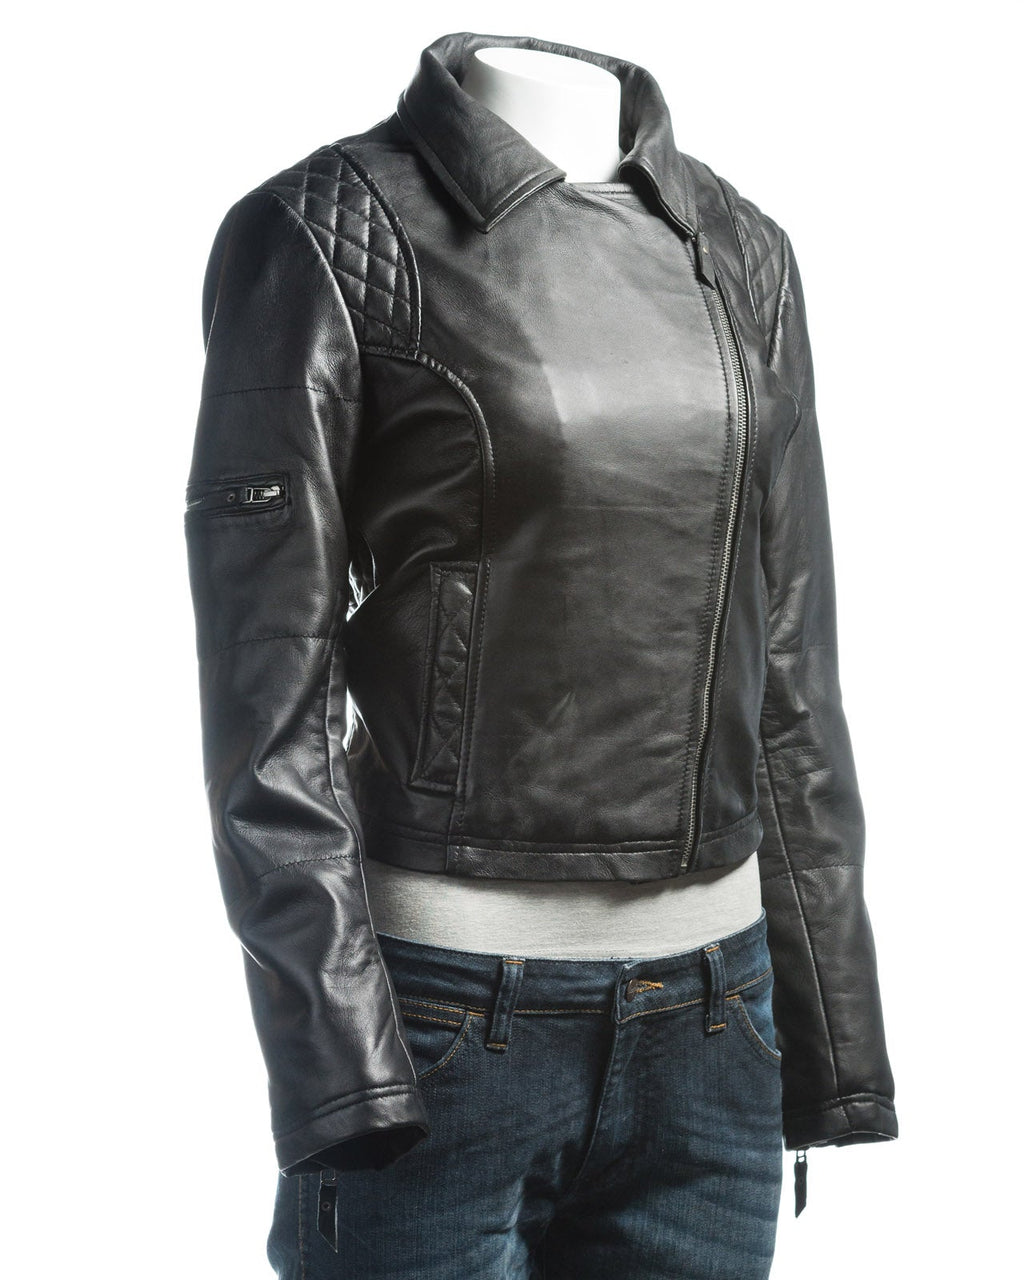 Ladies Brown Slim Fit Diamond Quilted Biker Style Leather Jacket With Detachable Hood: Flora